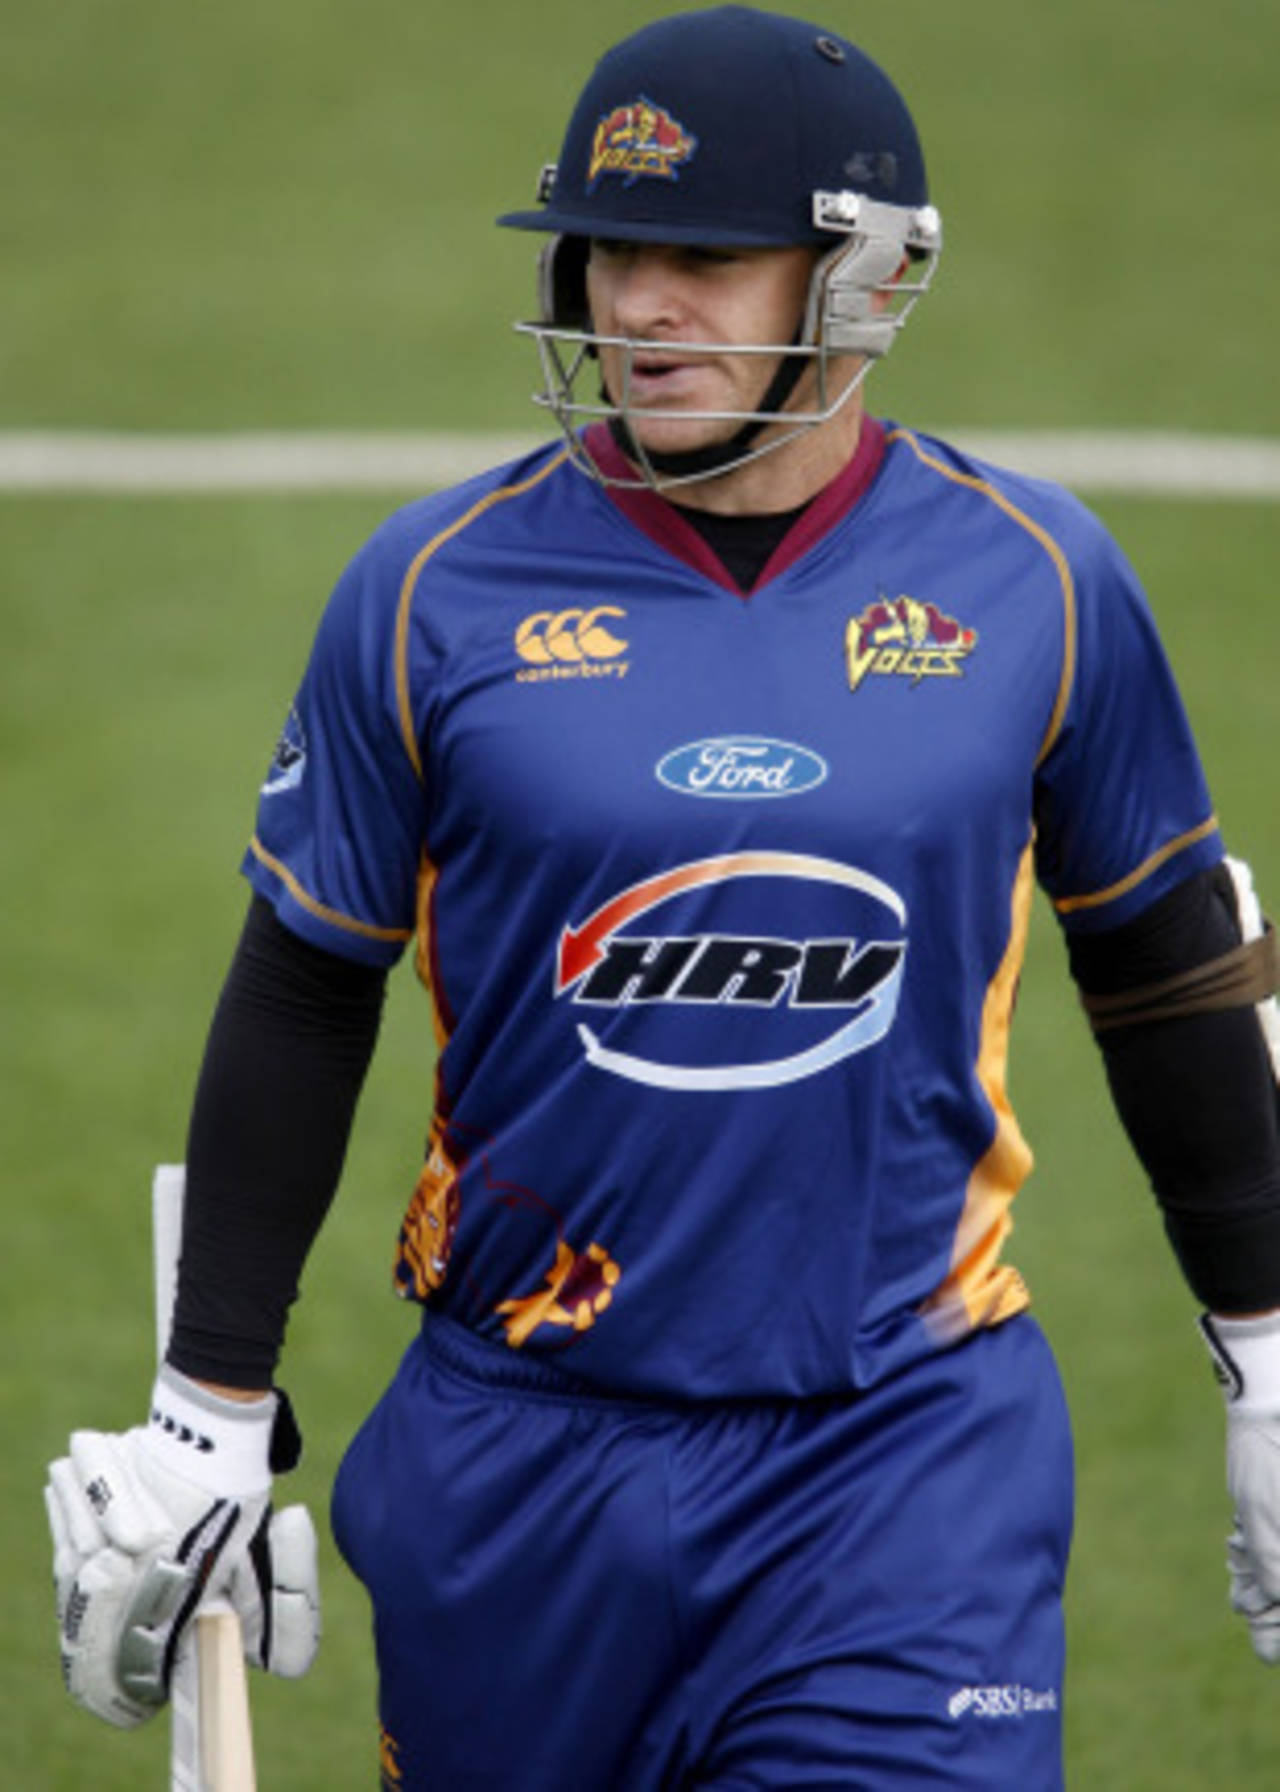 Nathan McCullum is out for 14 on his return to the Otago side, Canterbury v Otago, Christchurch, HRV Cup 2010-11, December 15, 2010